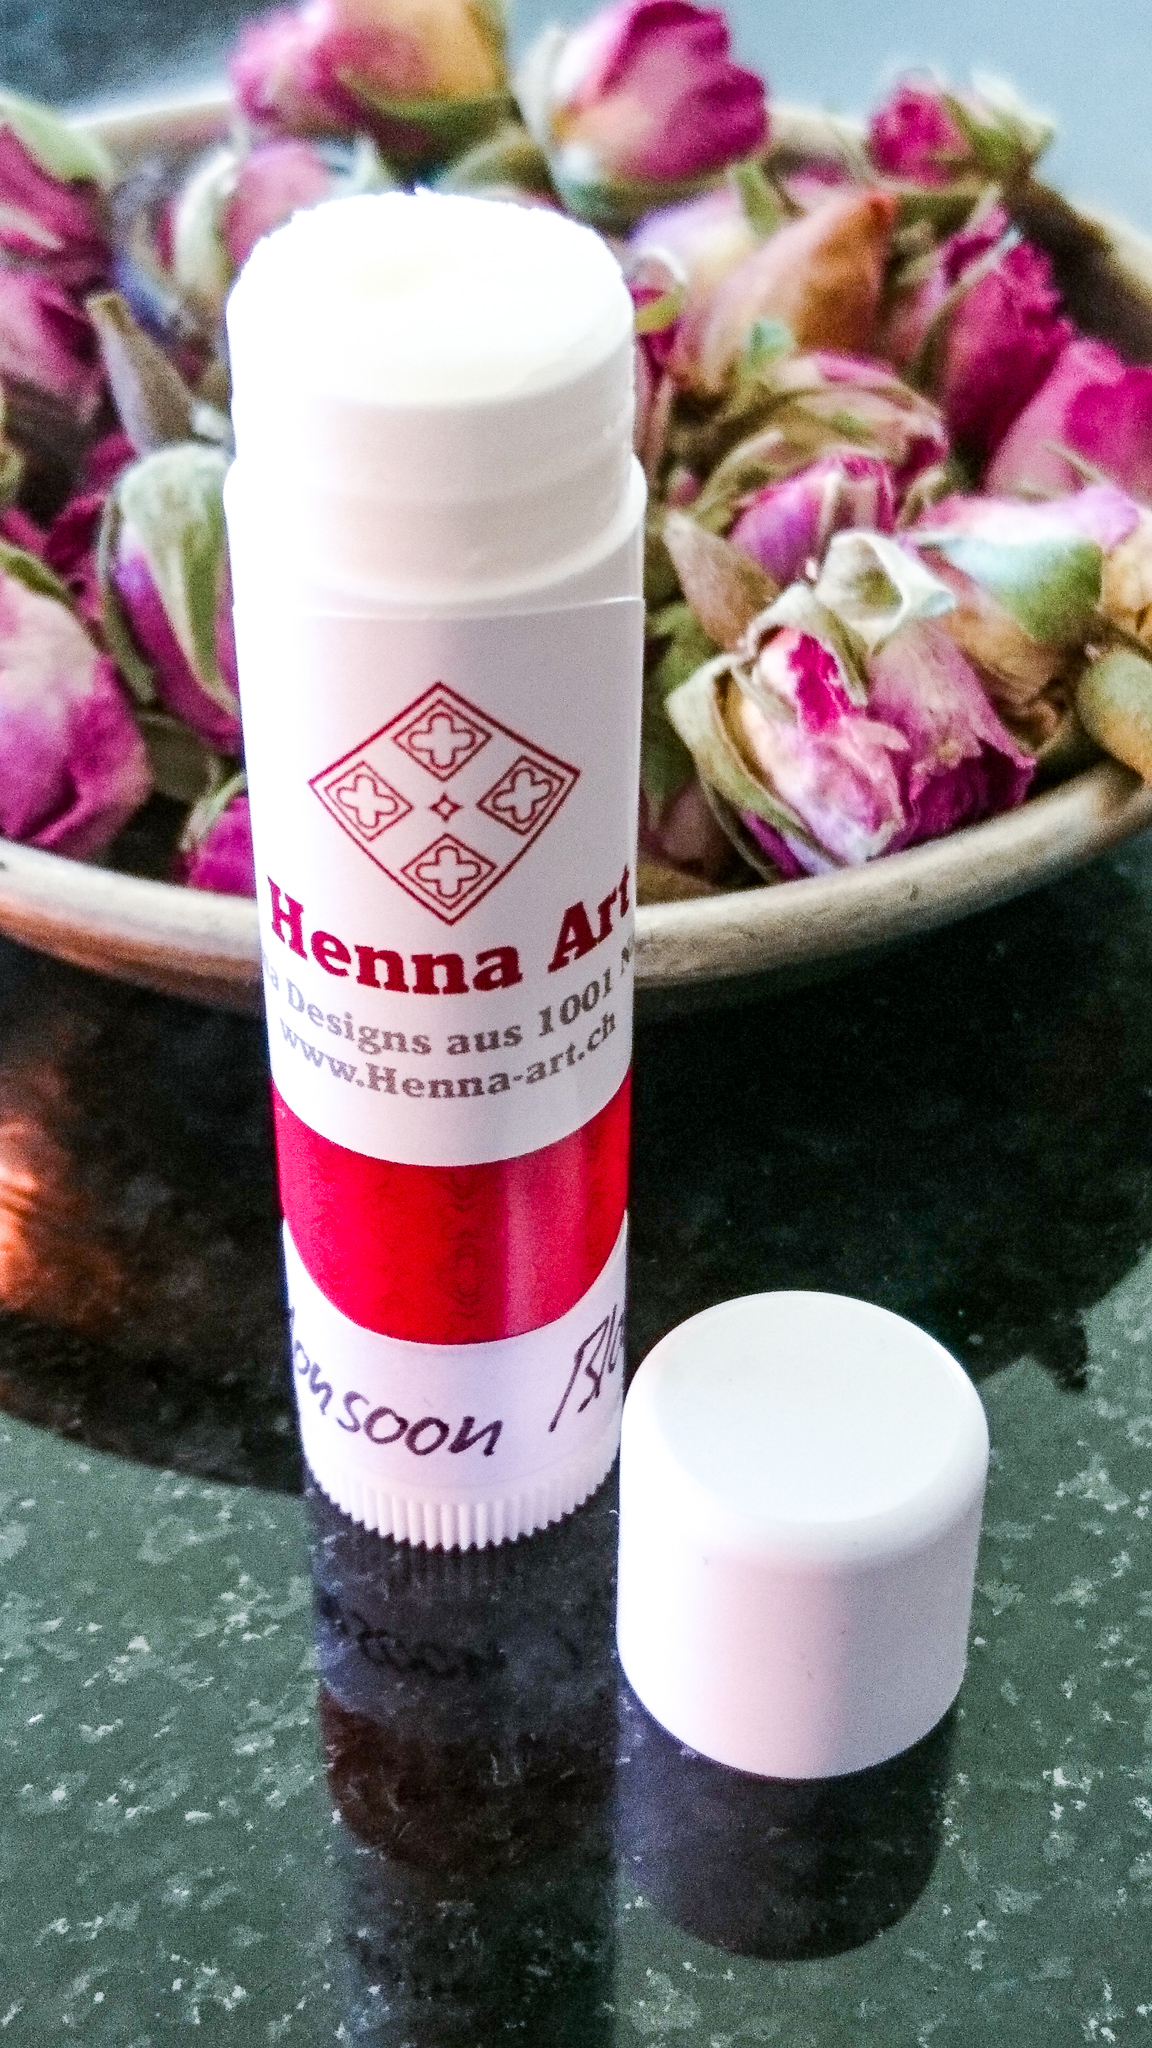 Henna after care Balm